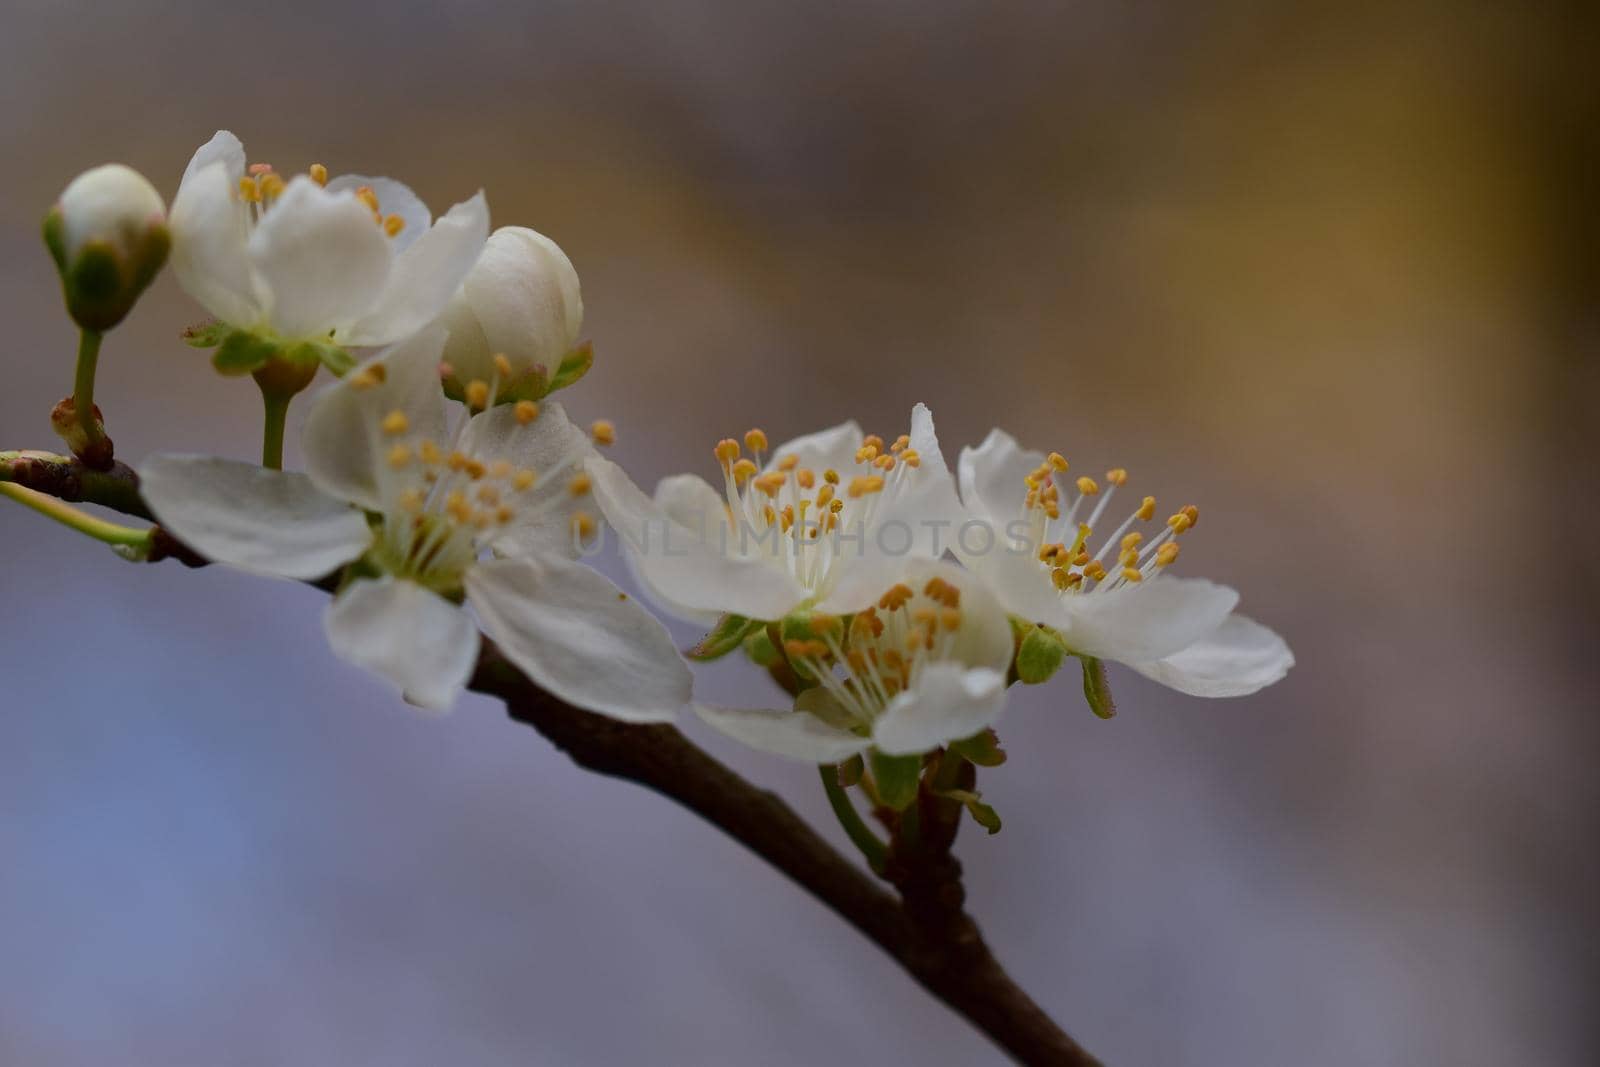 Close up of white blossoms against a blurred brown background by Luise123